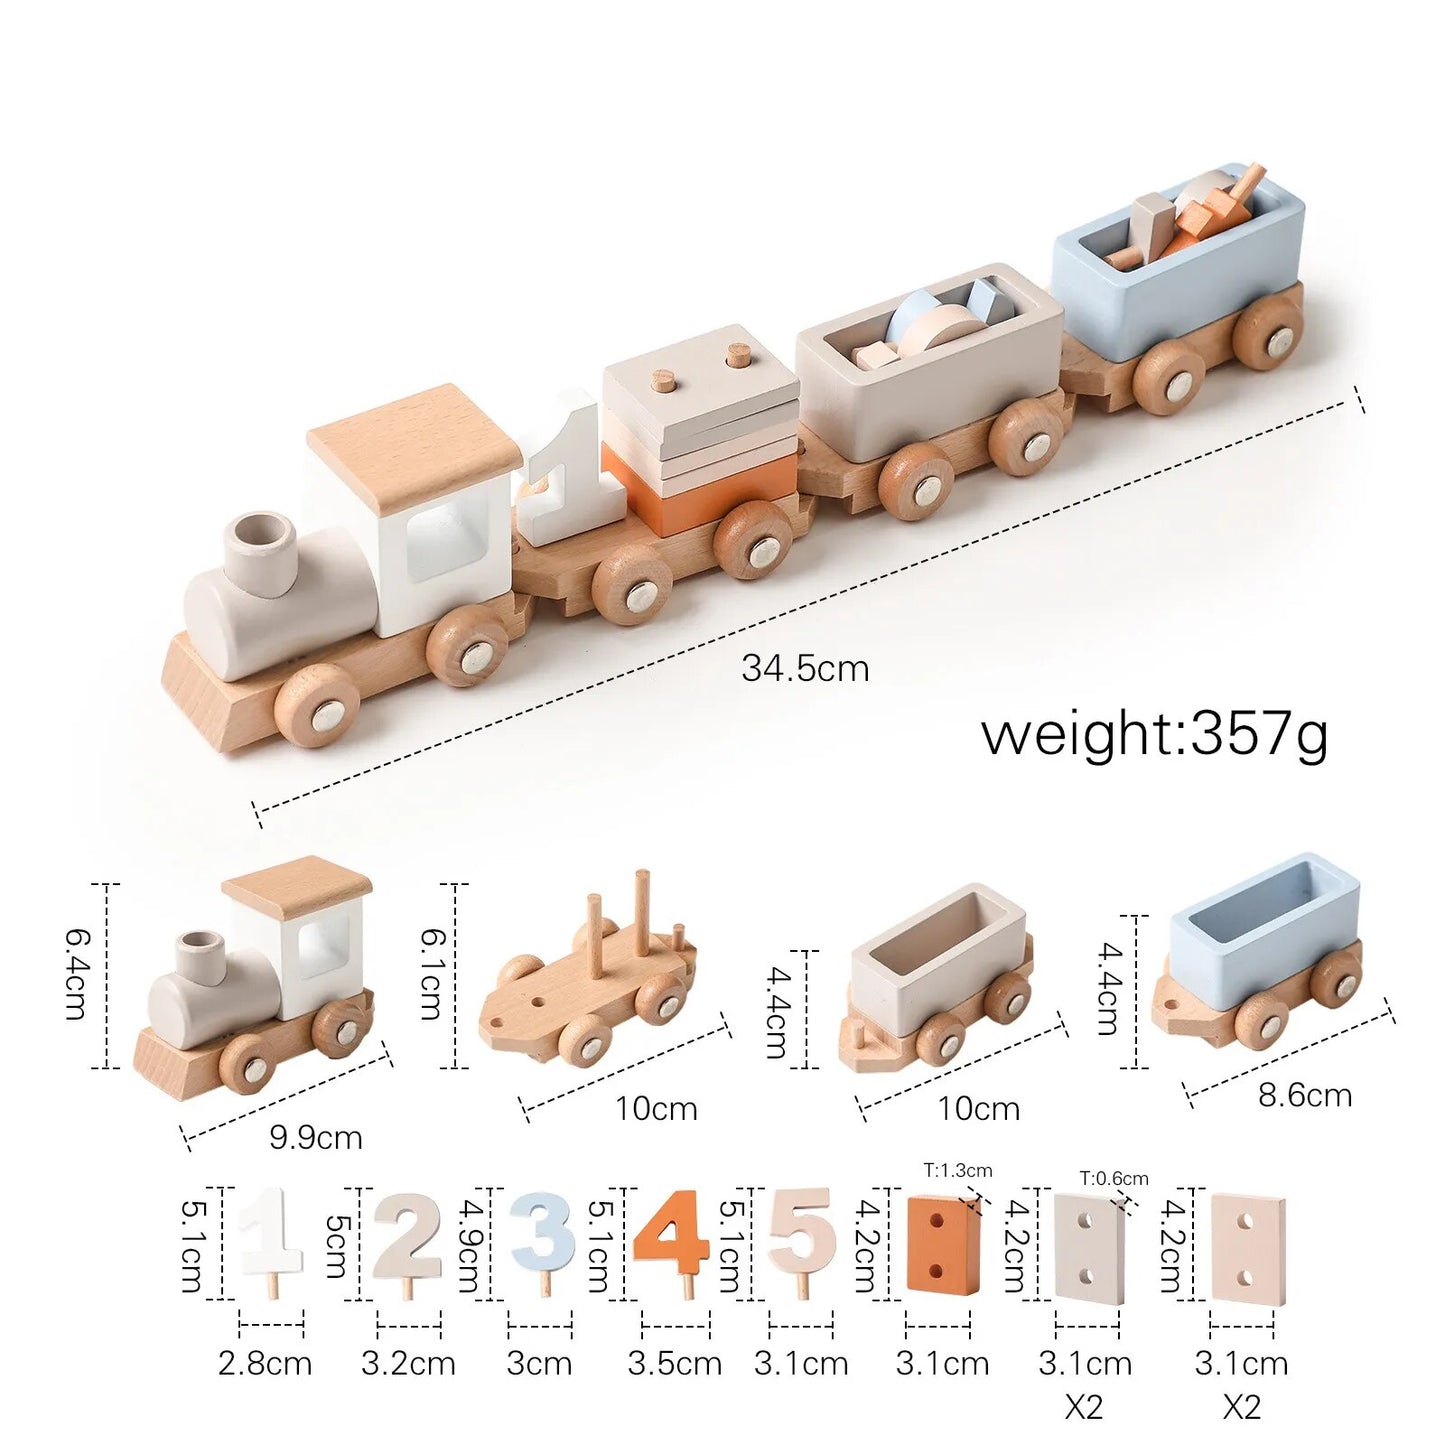 Children's Cake Decorative Decoration Small Train Birthday Party Dress Up Toy Track Set Wooden Train